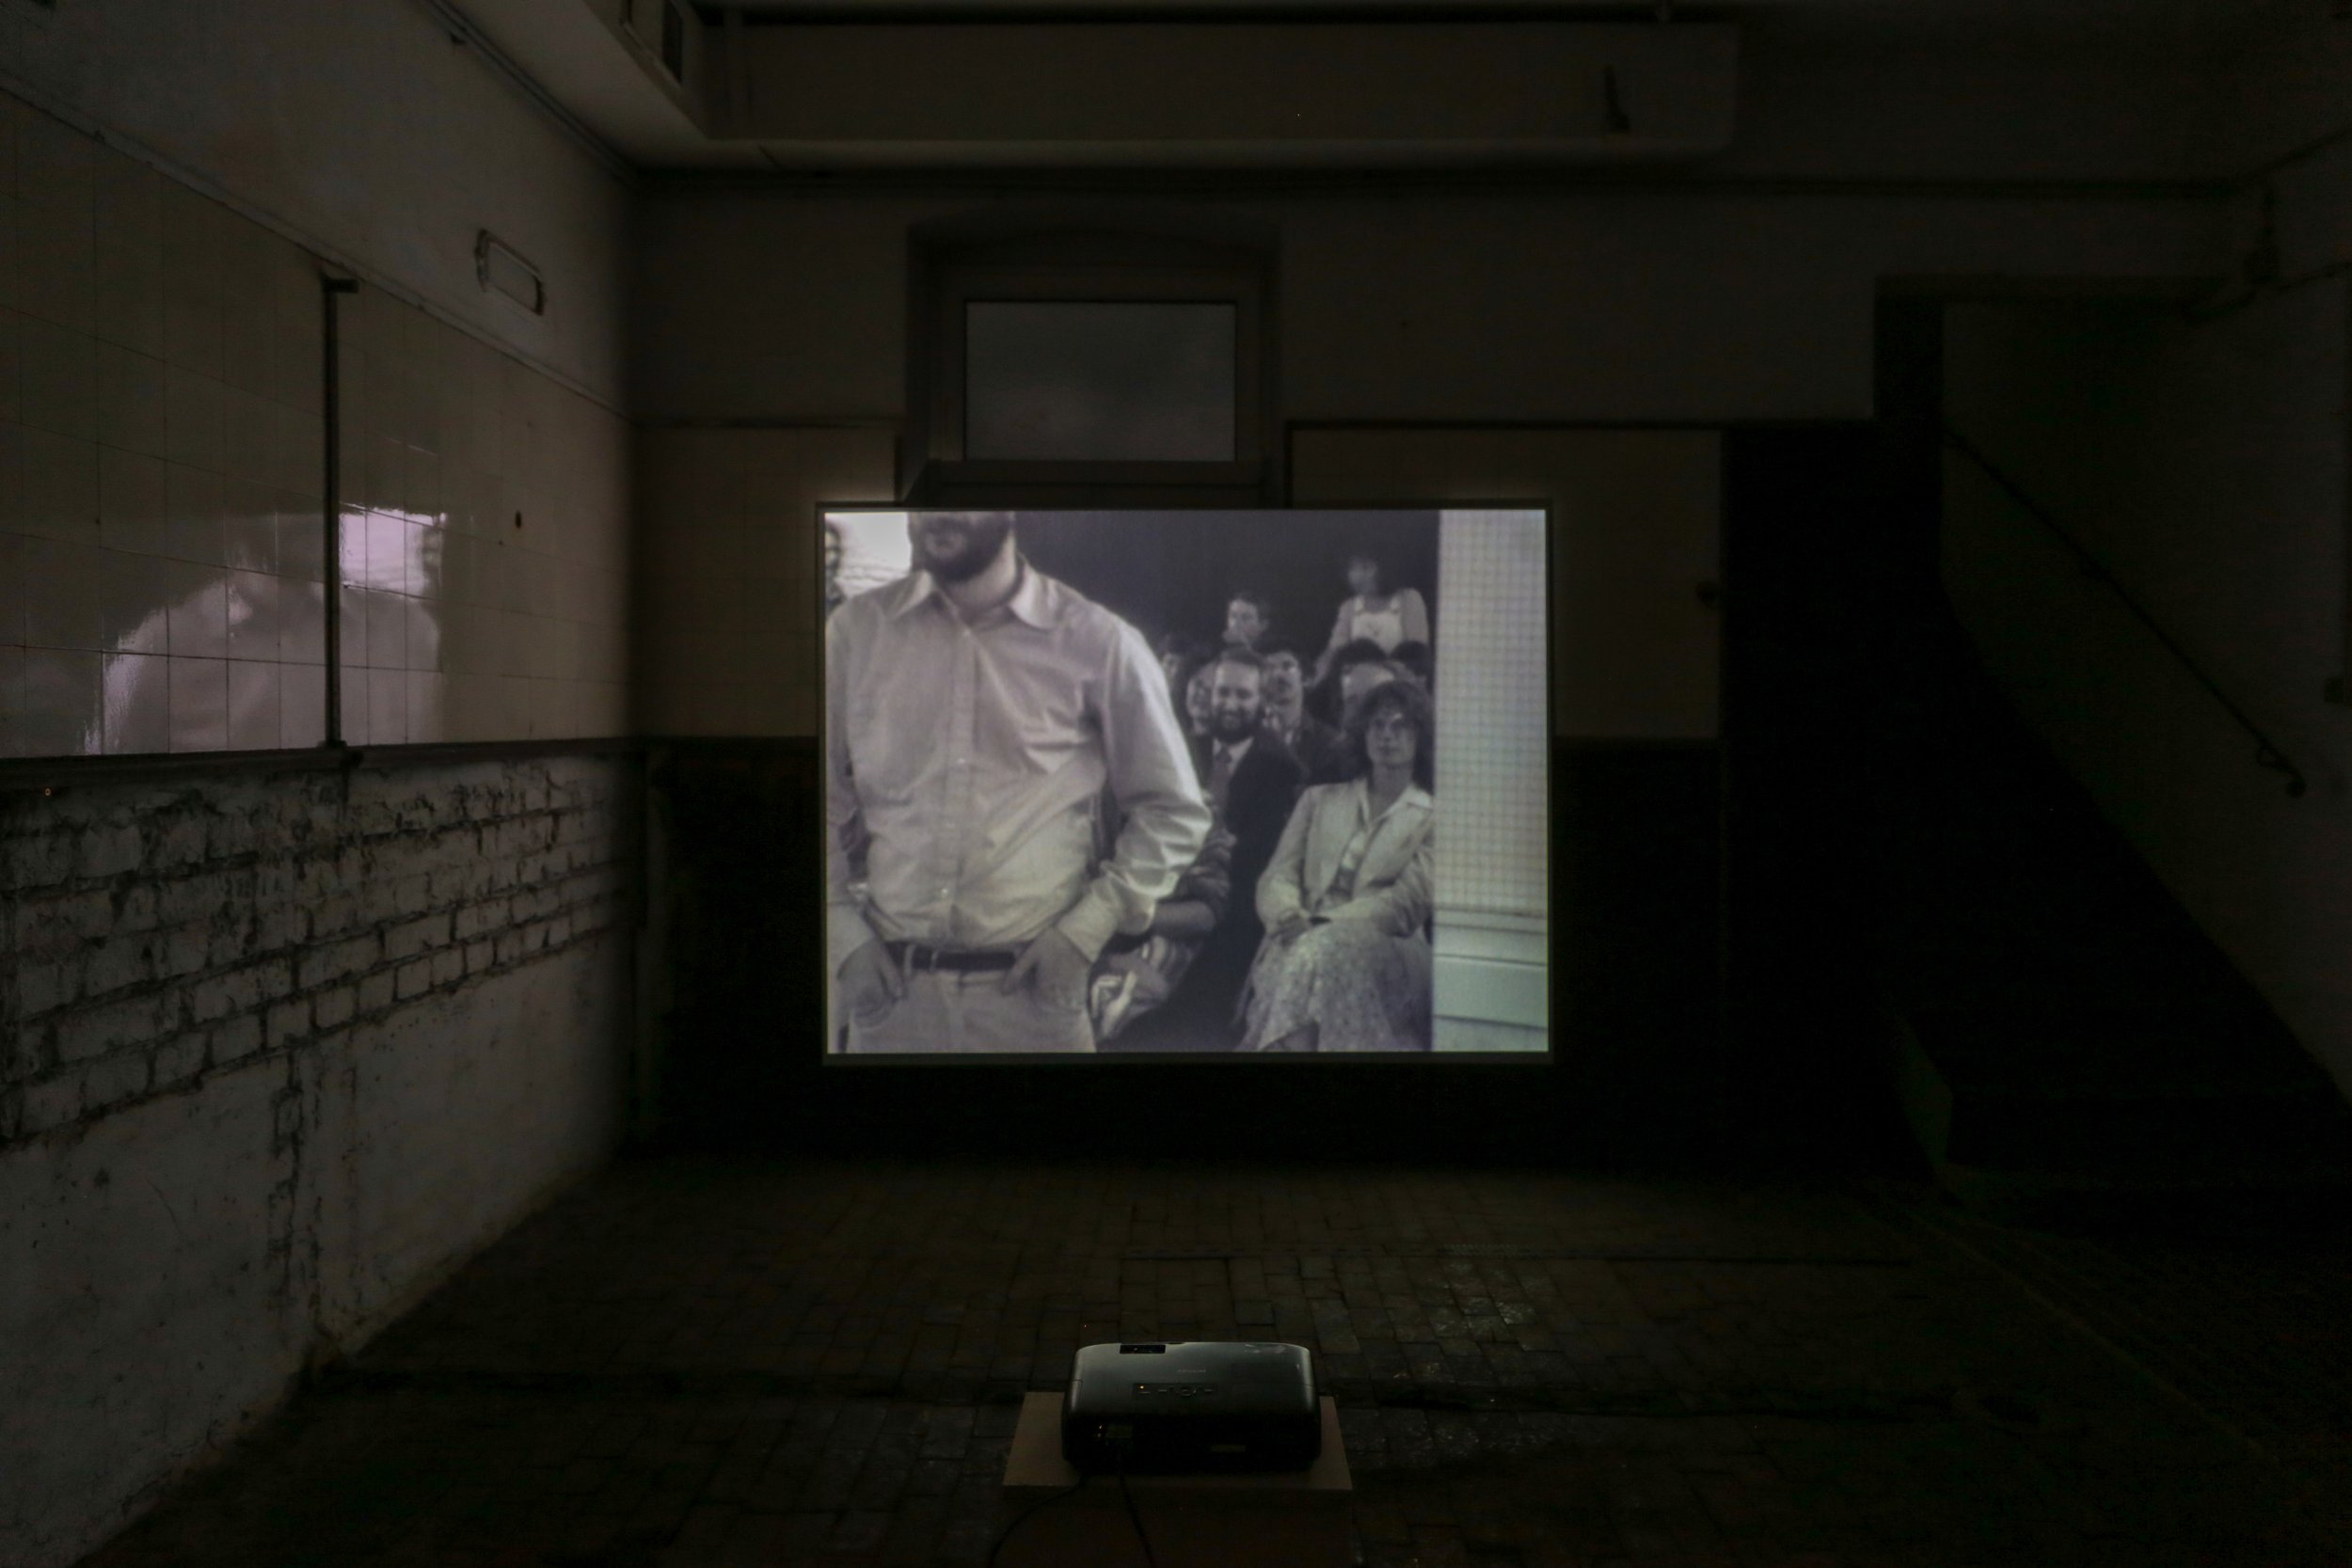   fig5 installation view Dan Graham, Audience/Performer/Mirror, 1977, 00:17:45., In collections: De Appel, LIMA  